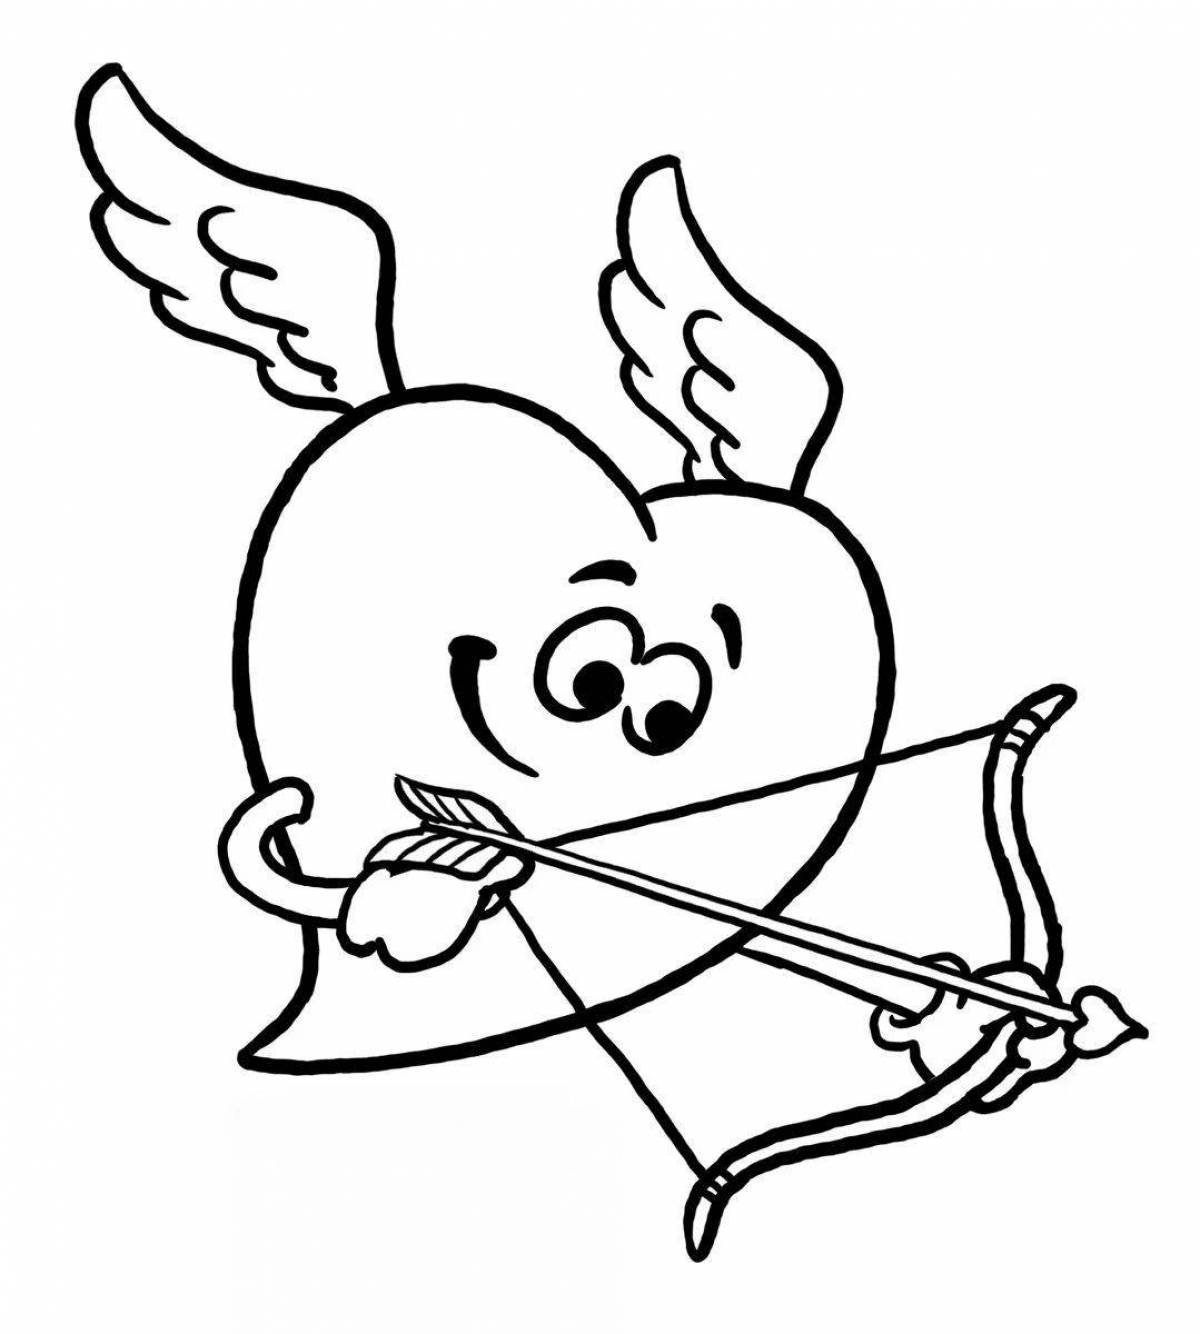 Coloring book lovely cupid